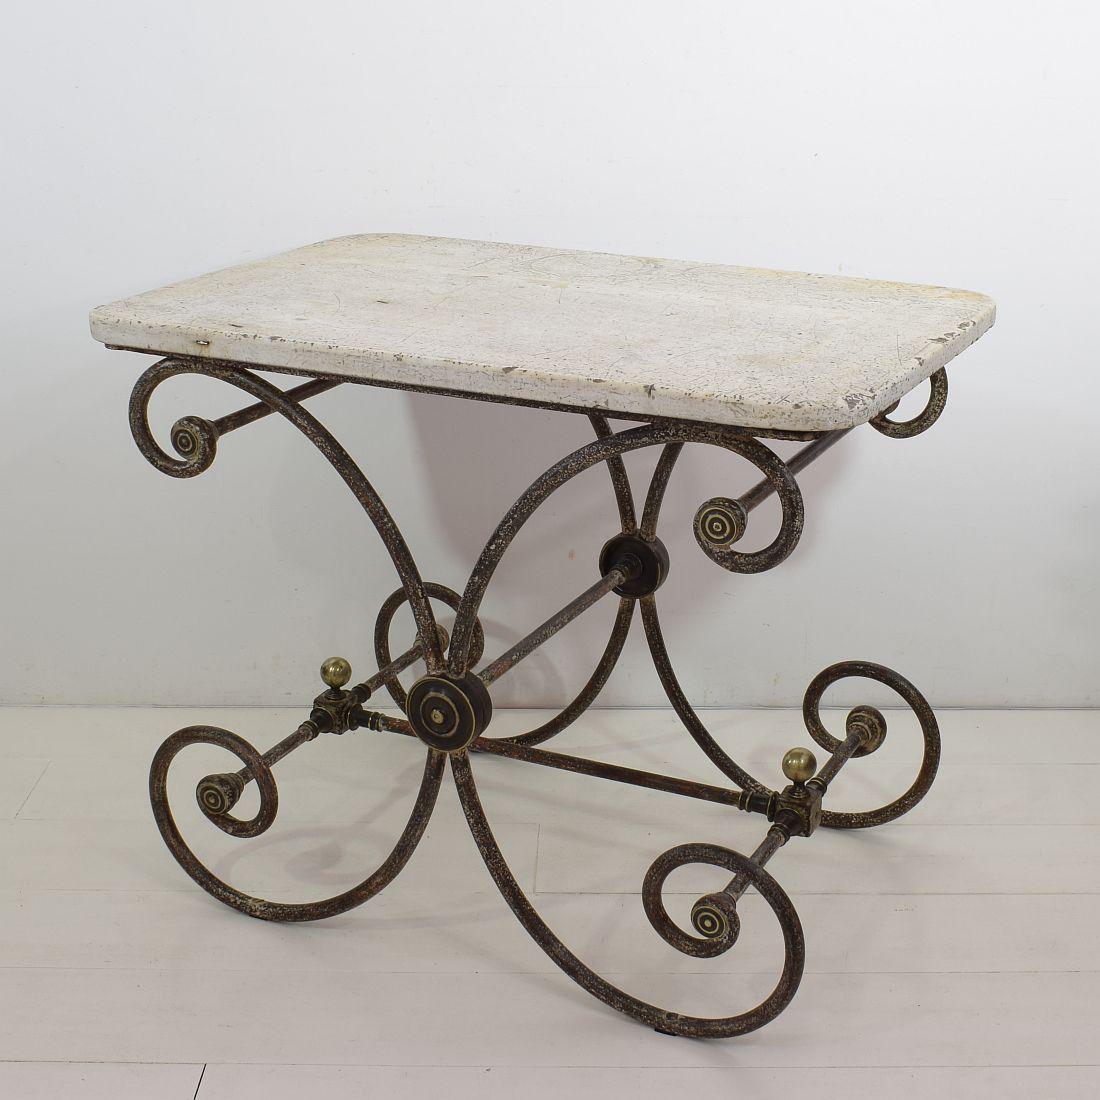 A wonderful 19th century French butcher/ pastry table from the South of France. Handsomely constructed with a cast iron base with its original and beautiful weathered marble top. Great brass ornaments. Small hairline visible in the marble top with